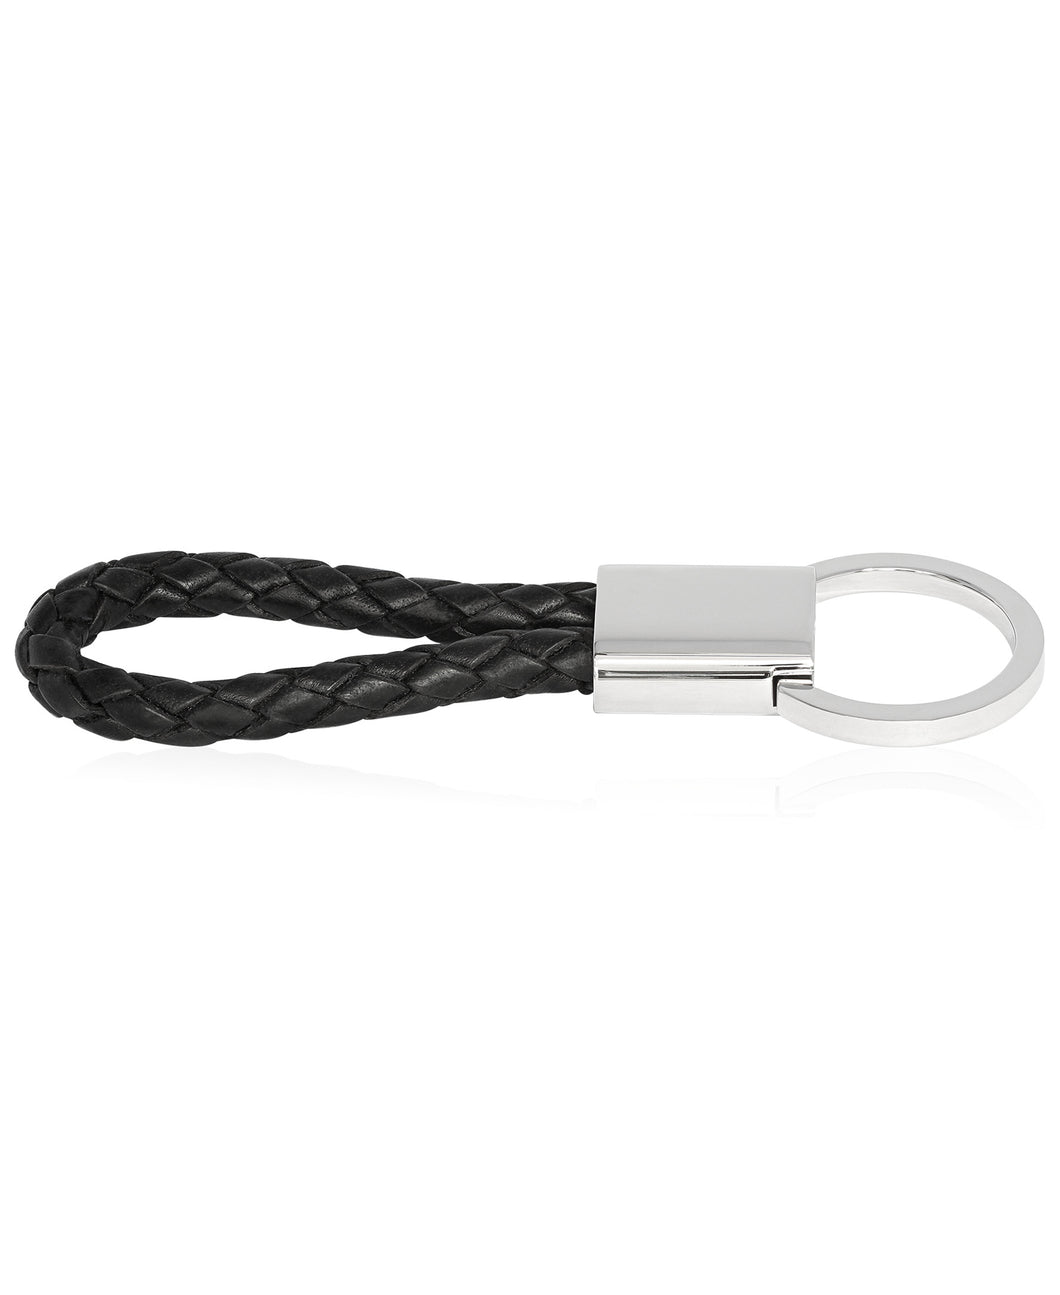 Sutton Stainless Steel Braided Leather Key Ring